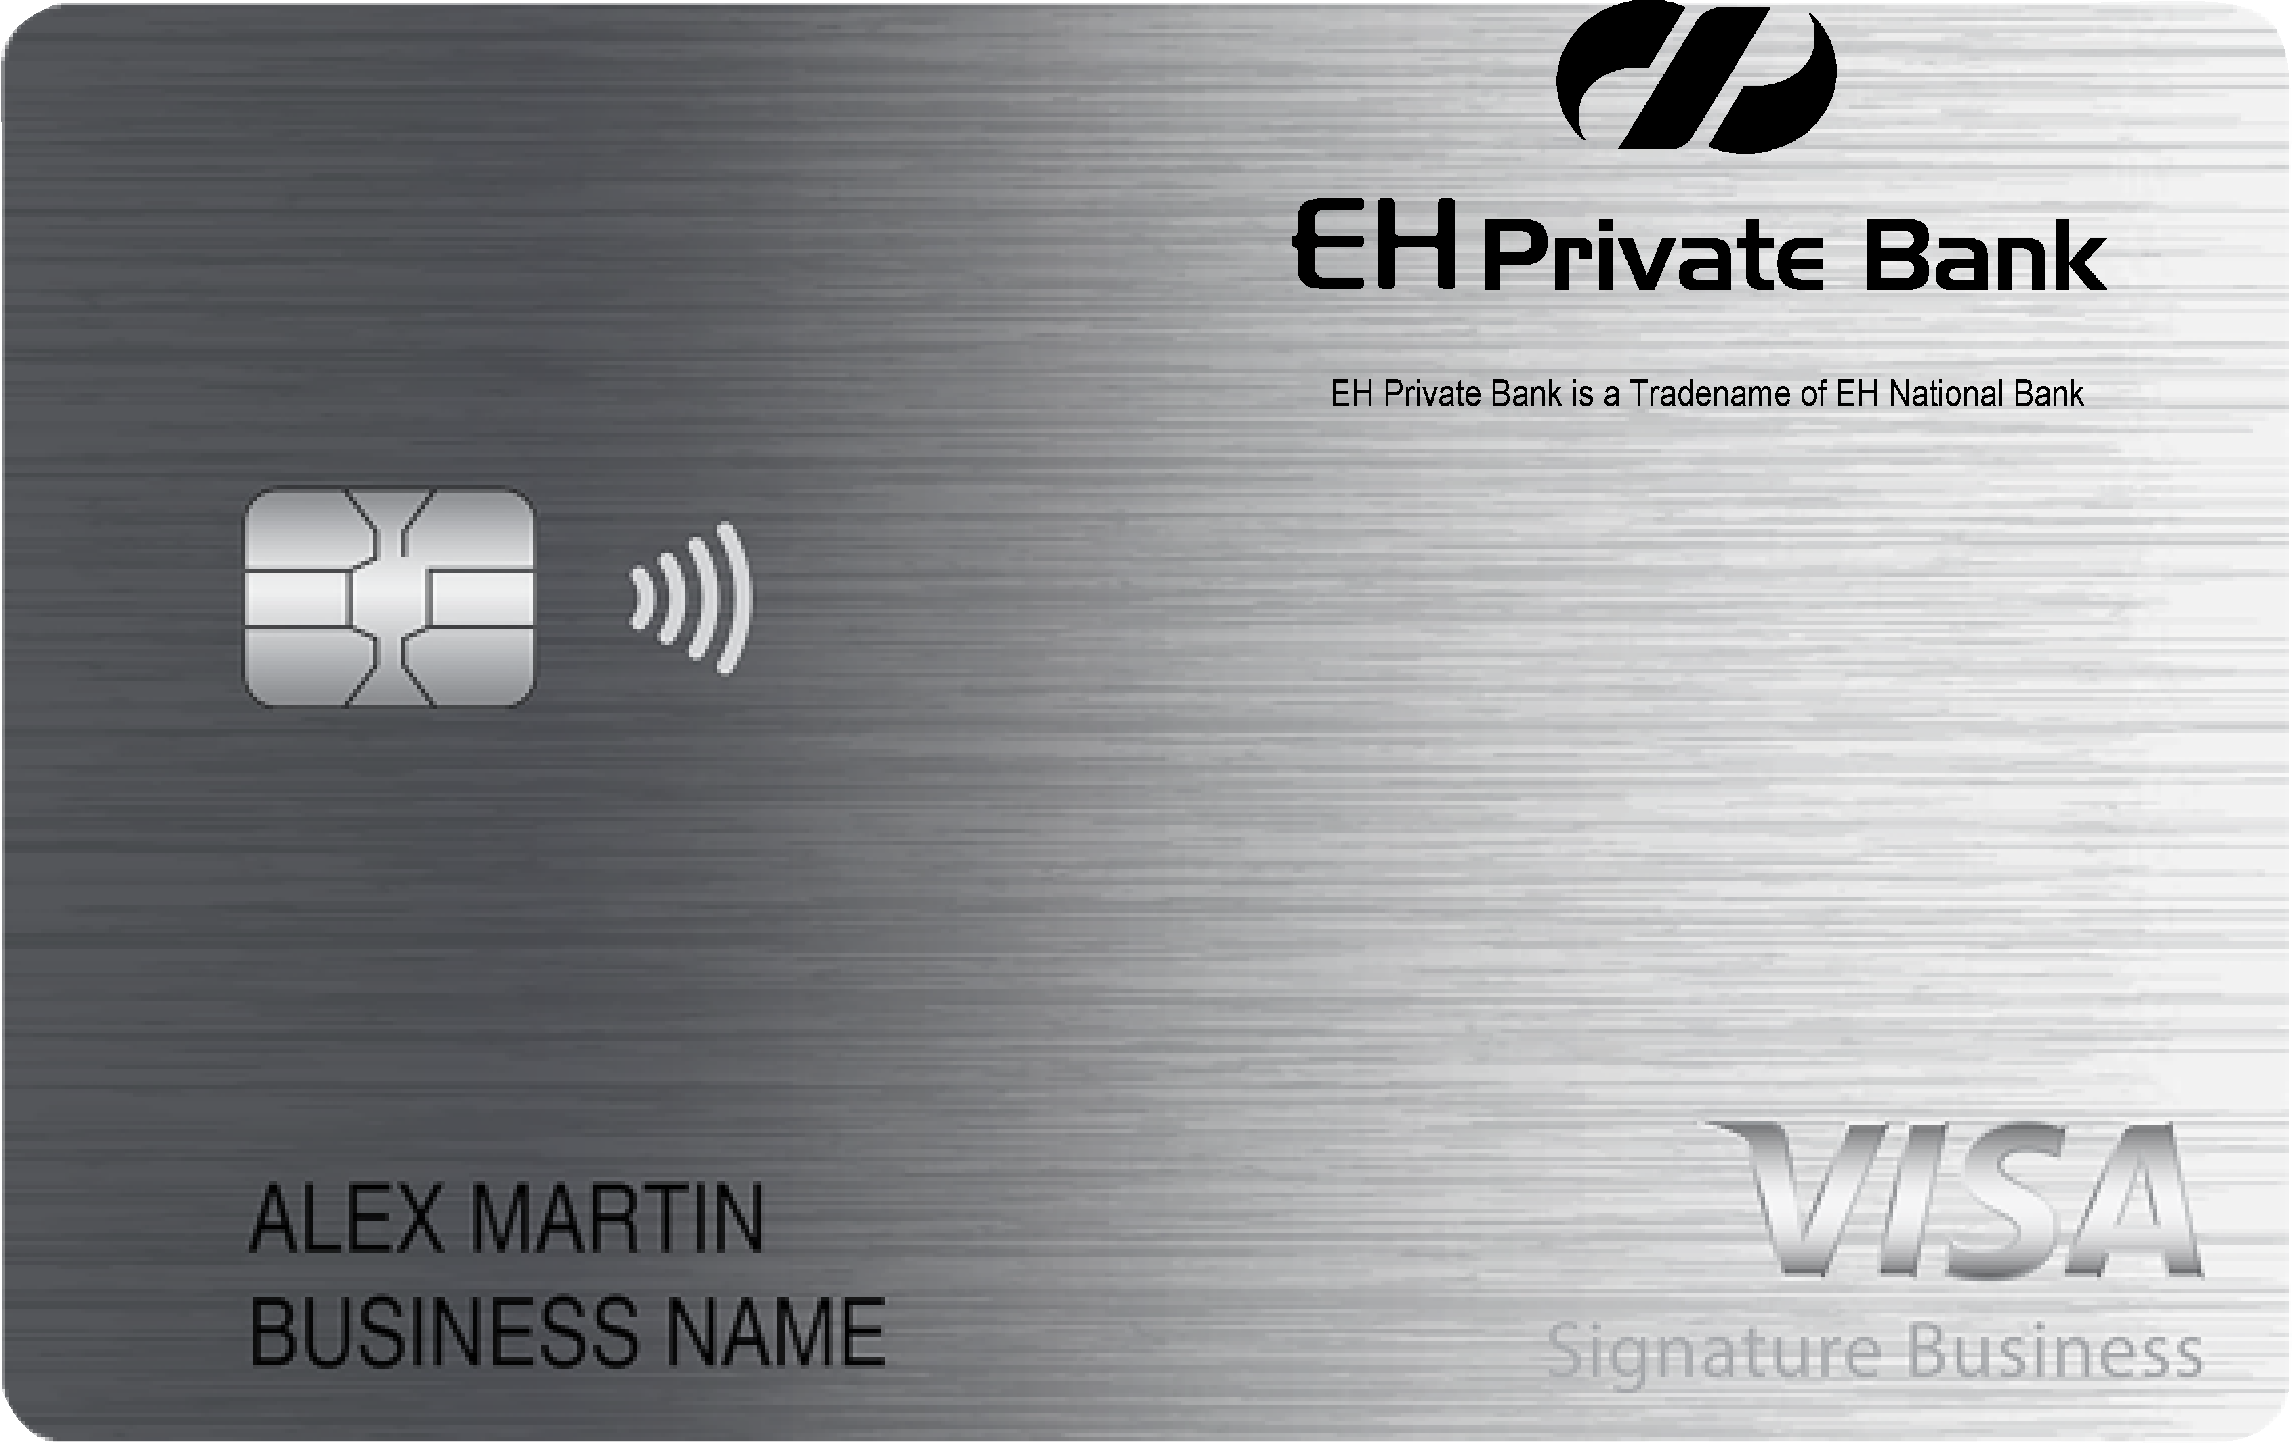 EH Private Bank Smart Business Rewards Card